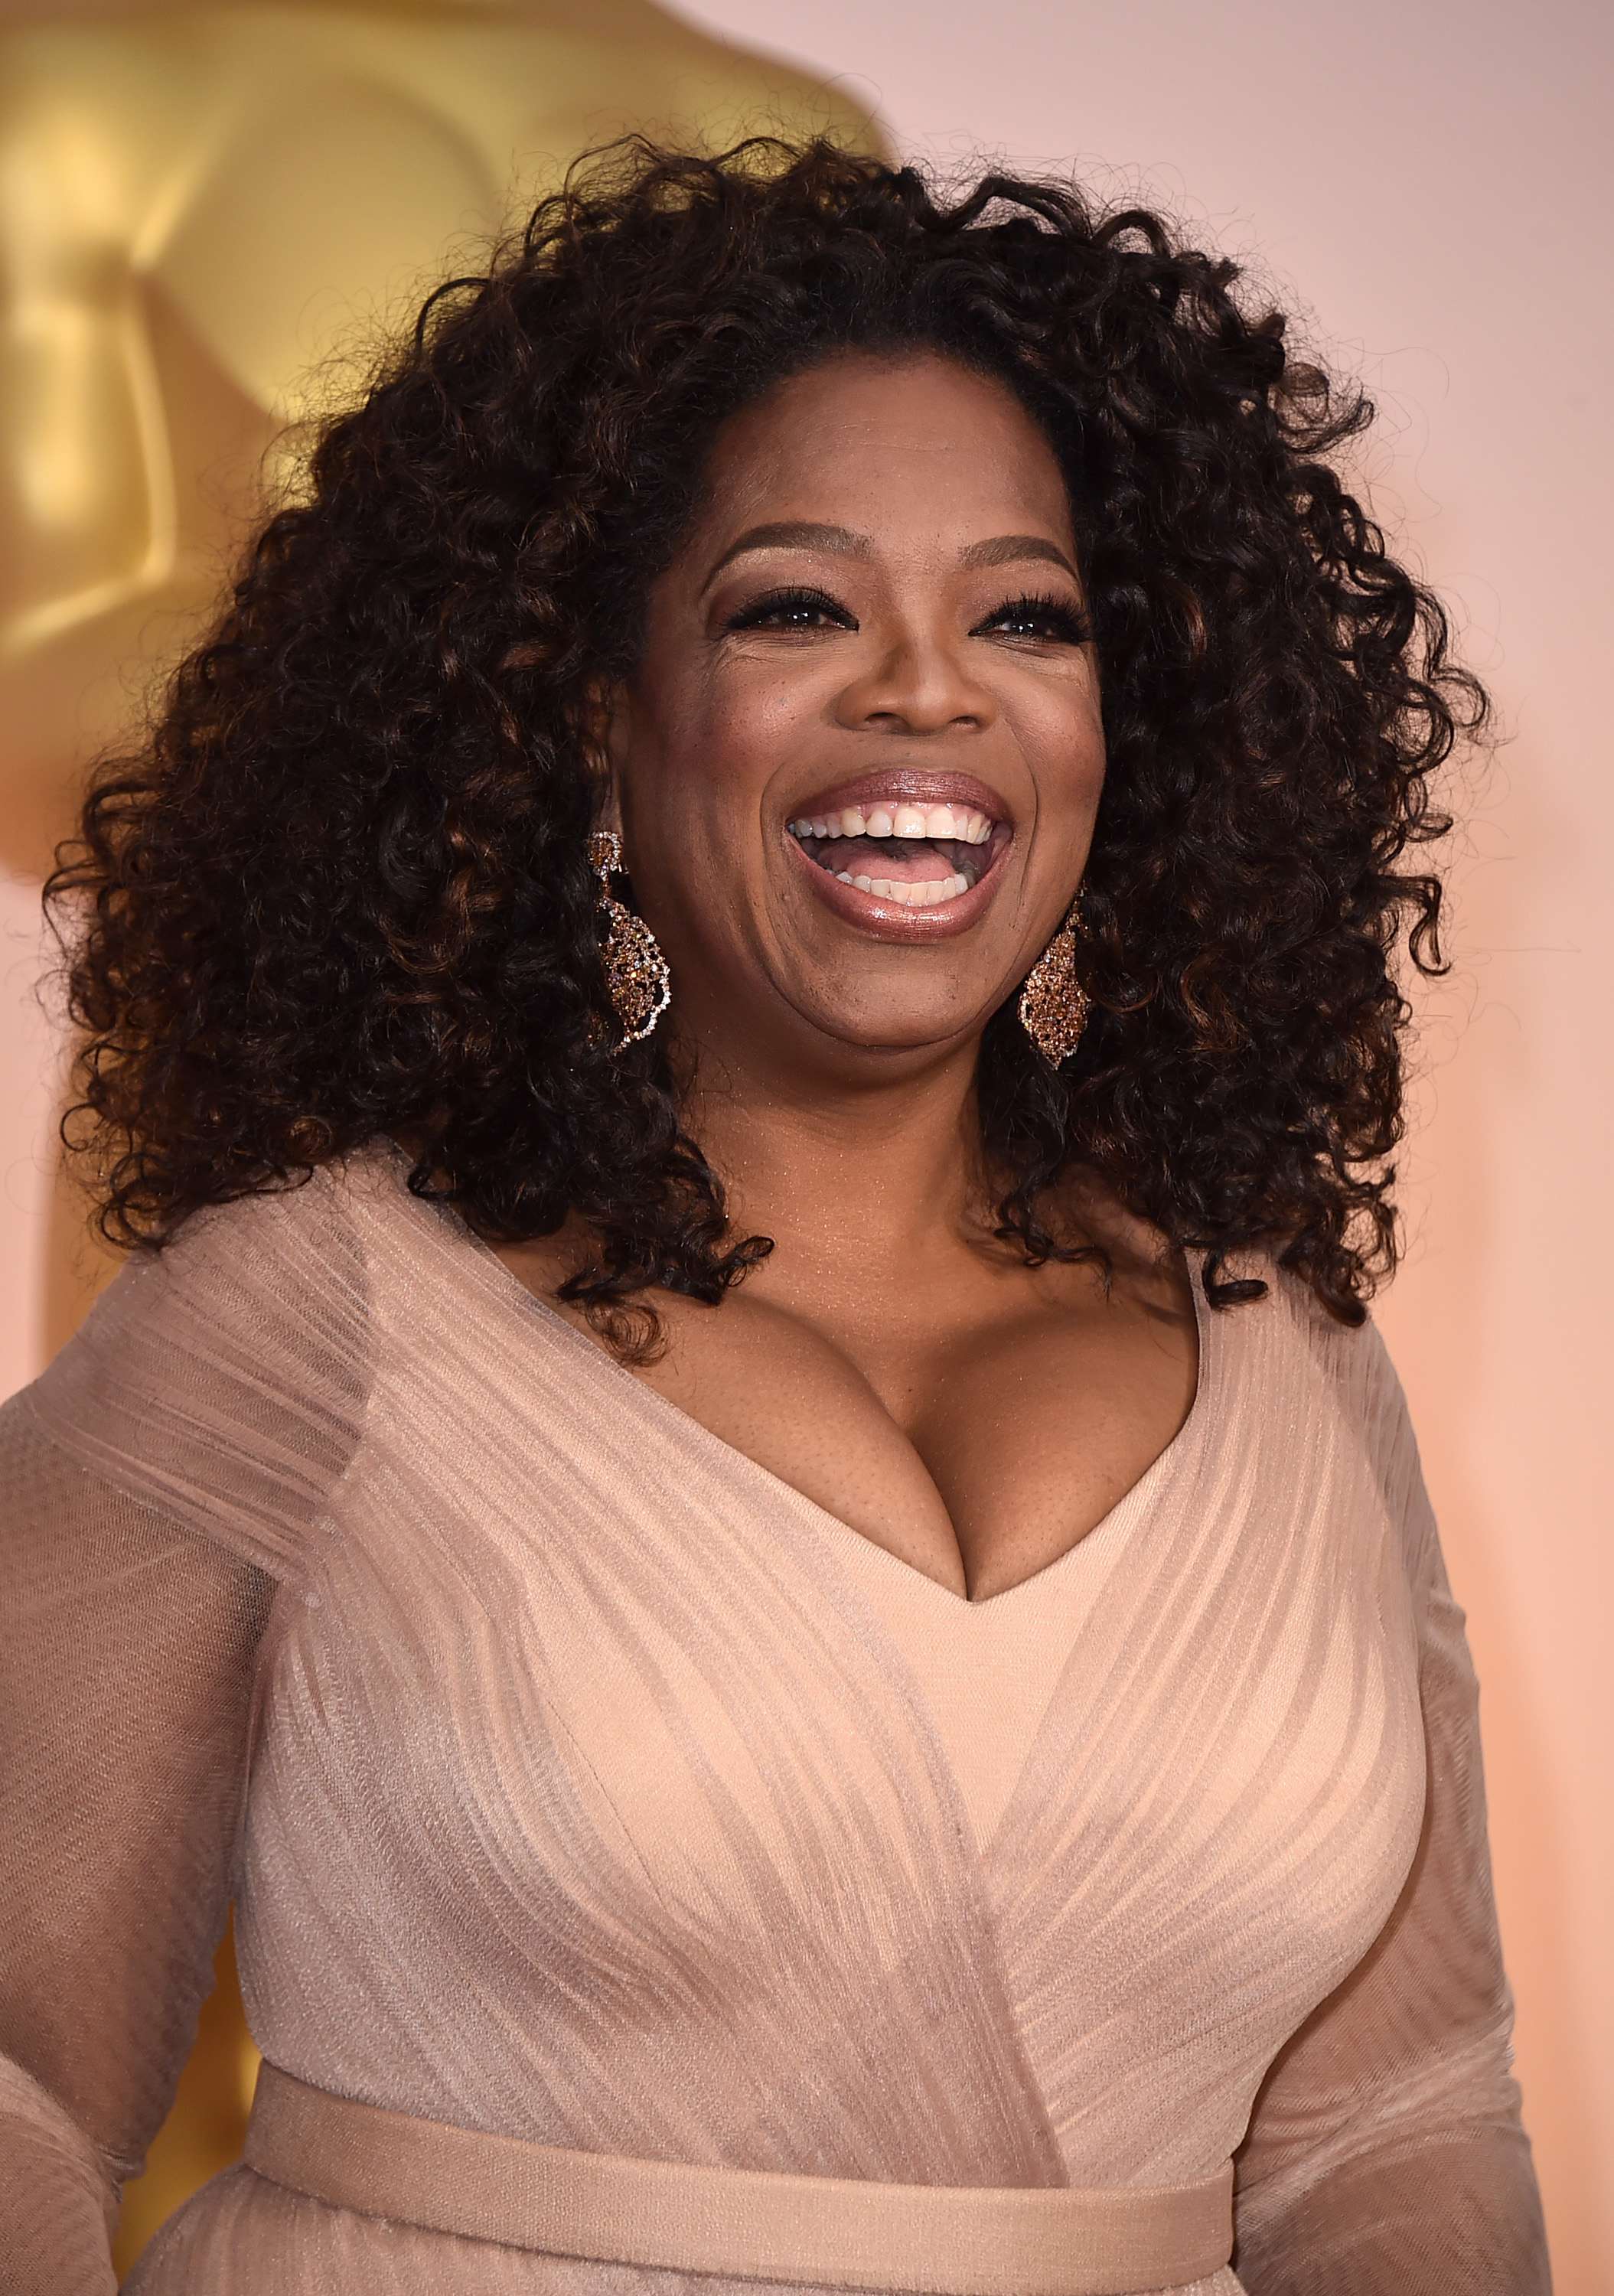 Oprah Winfrey arrives at the Oscars in Los Angeles on Feb. 22, 2015.